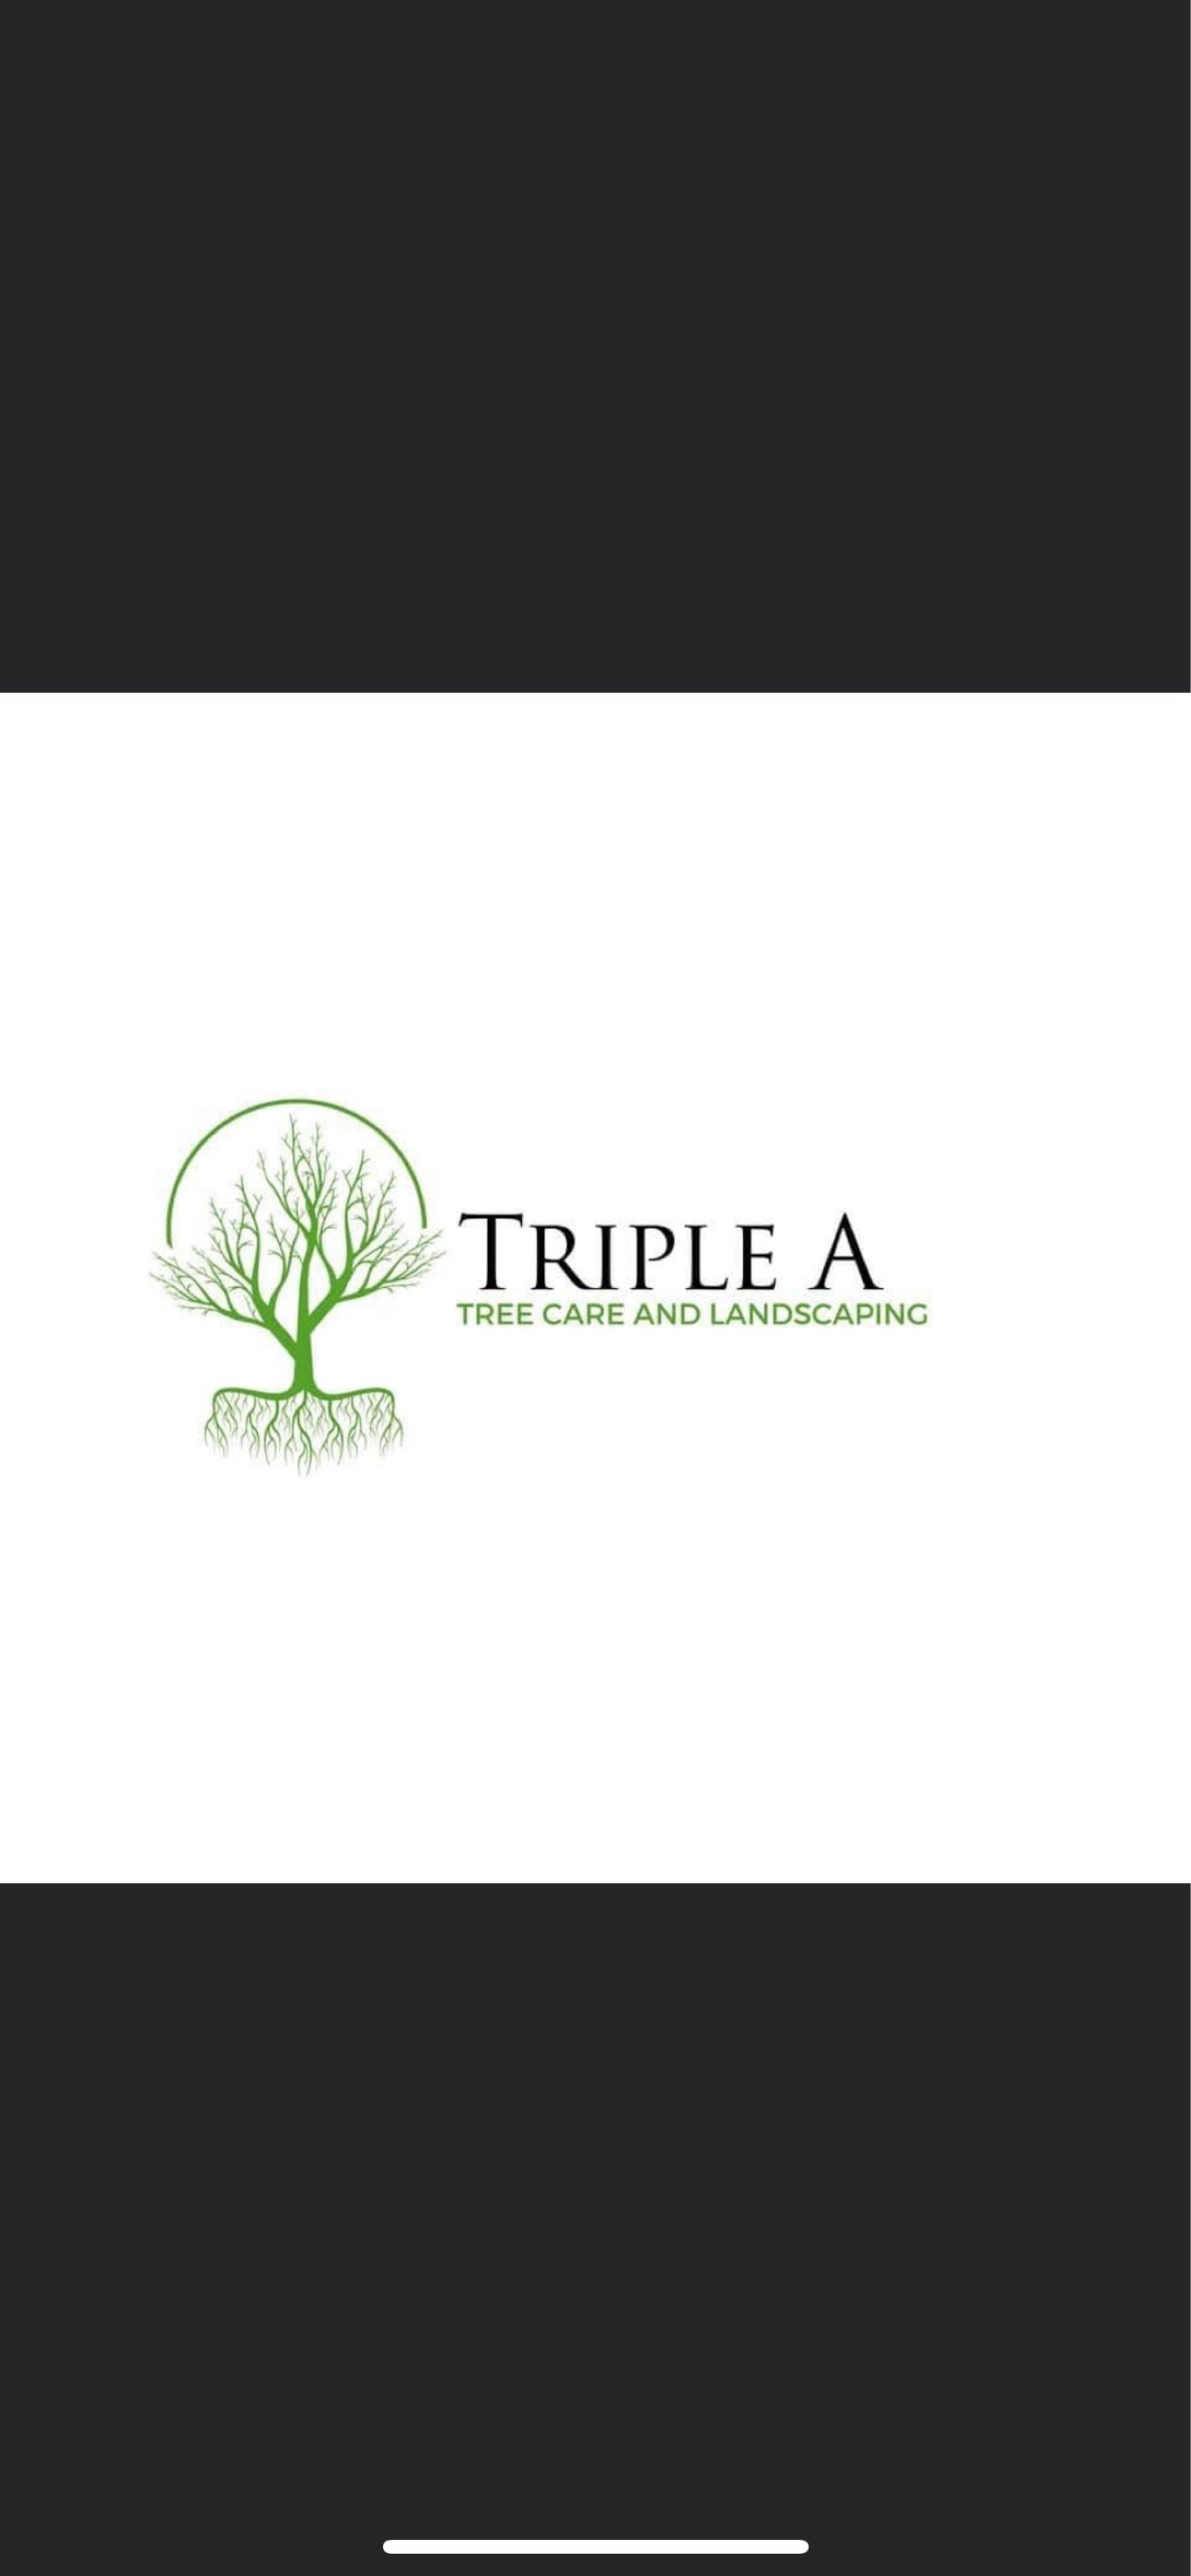 Triple A Tree Care and Landscaping Logo